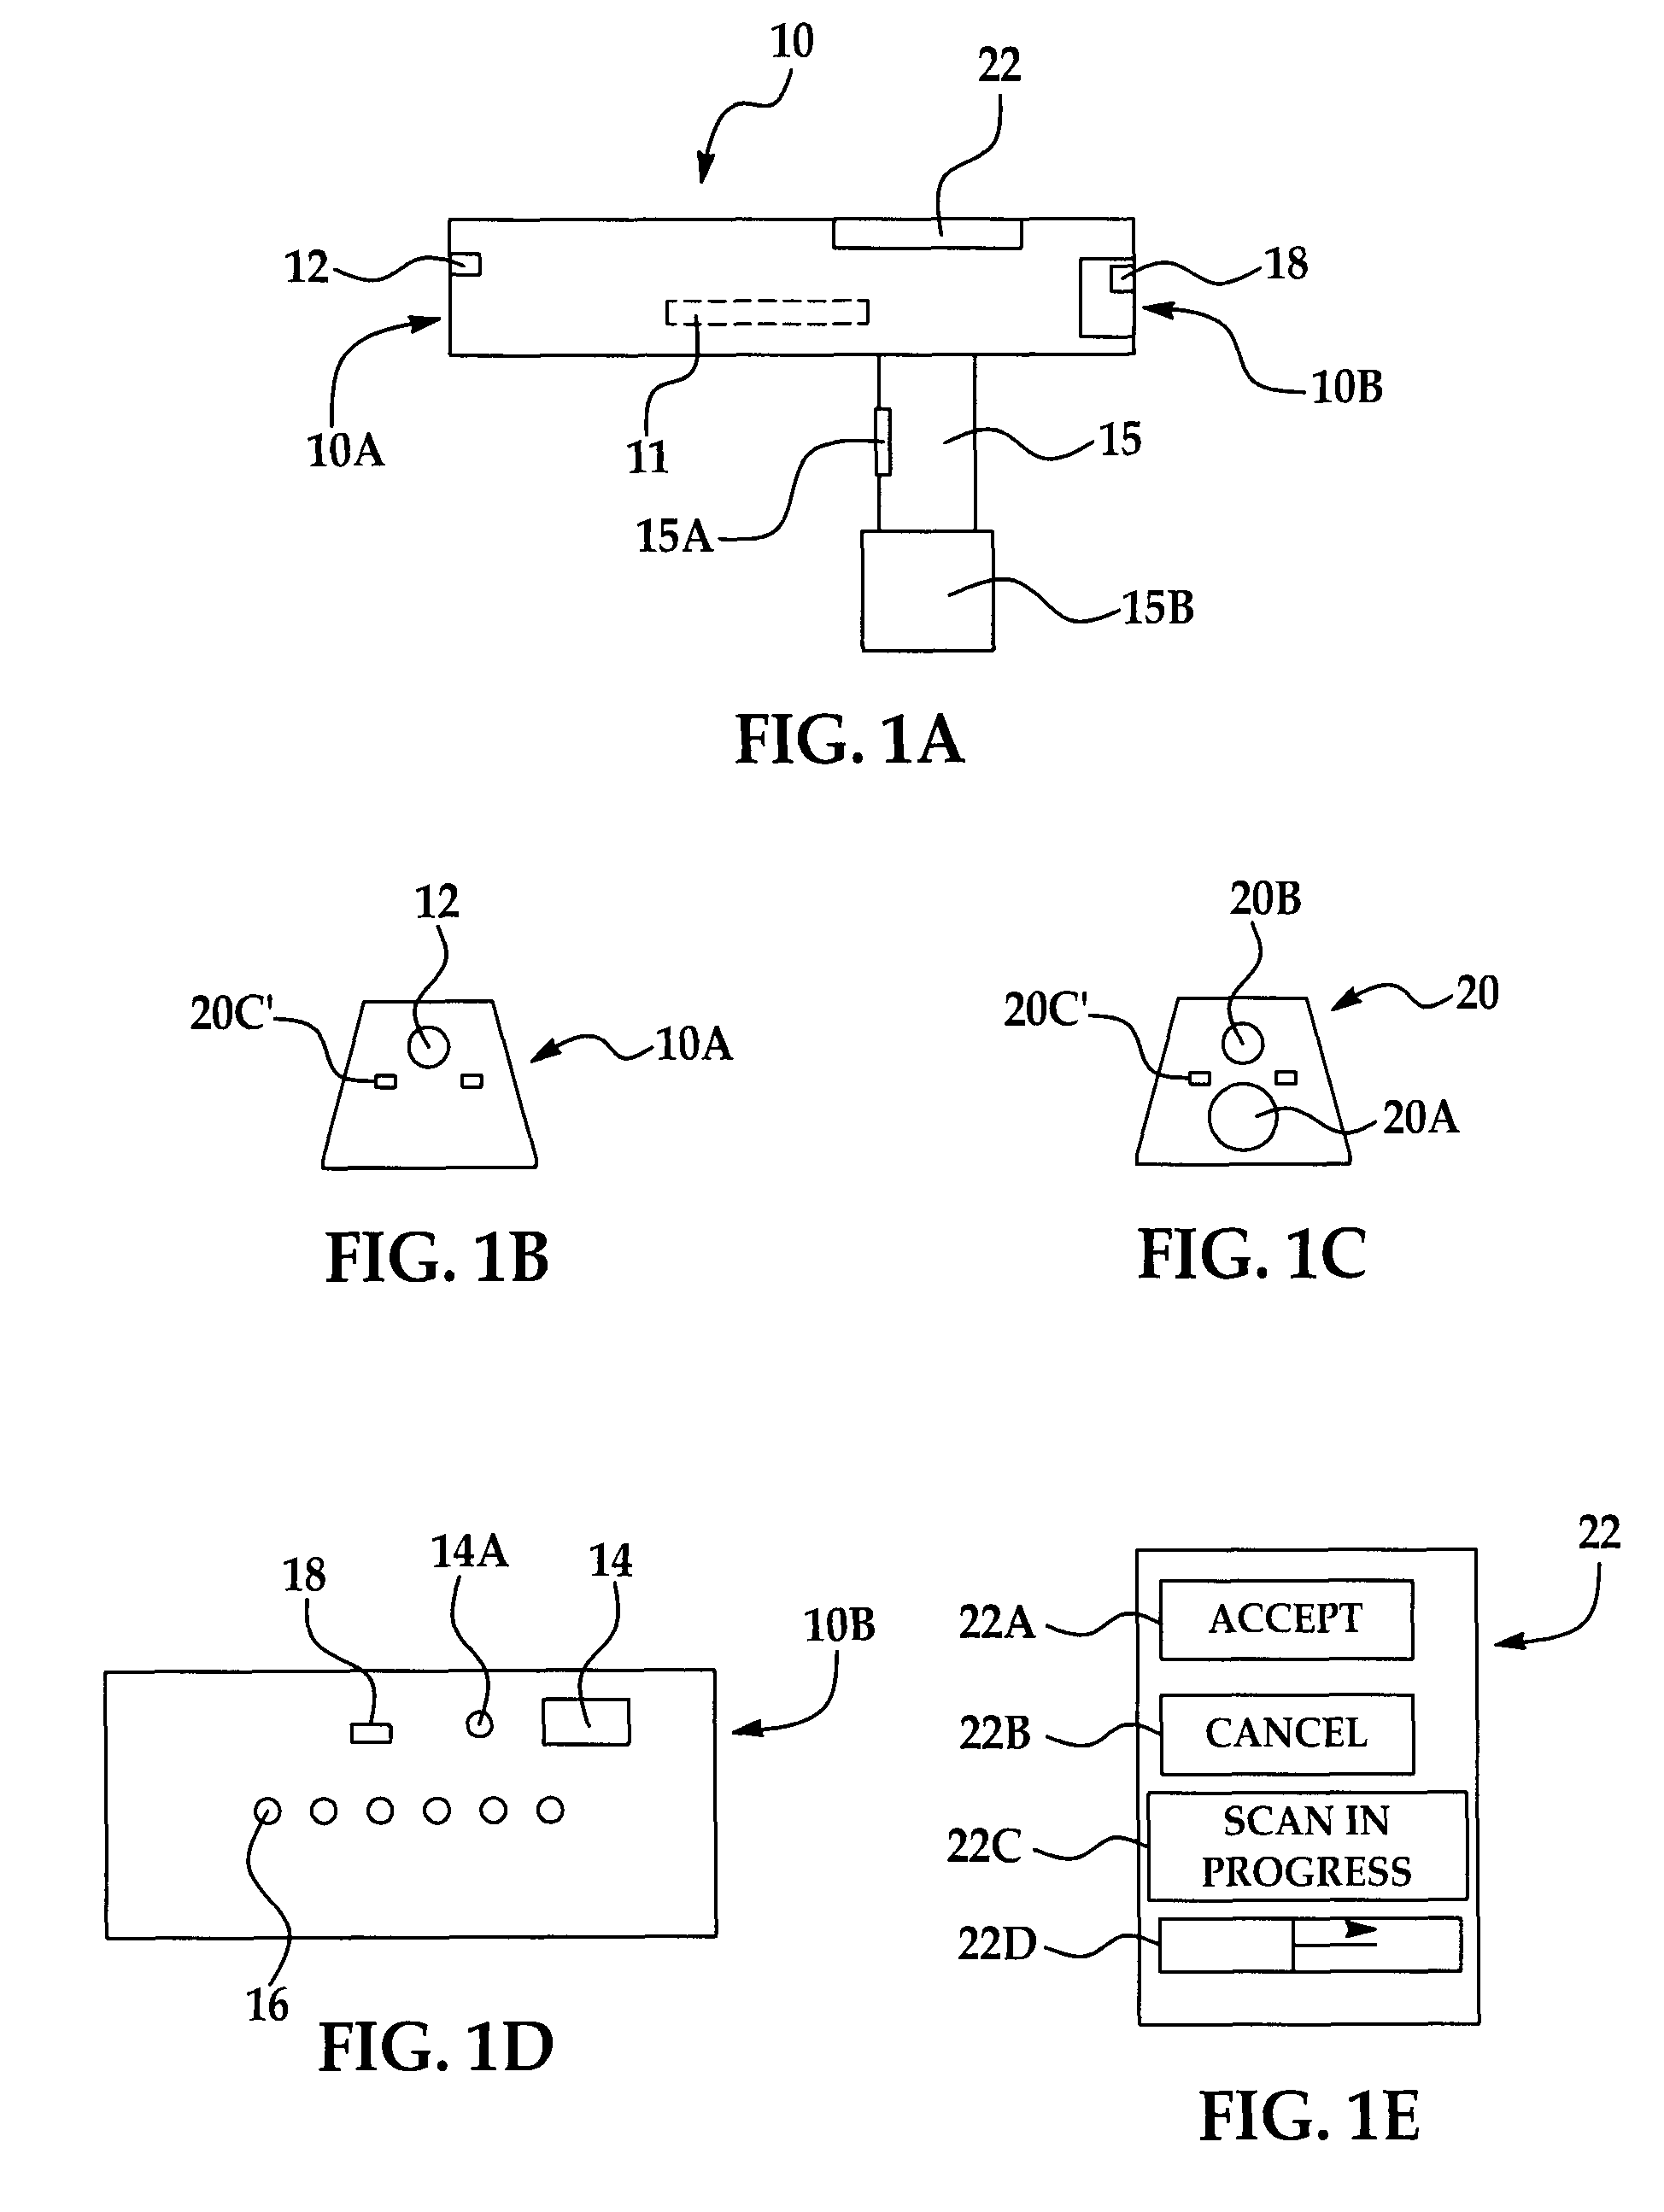 Sample preparation and methods for portable IR spectroscopy measurements of UV and thermal effect